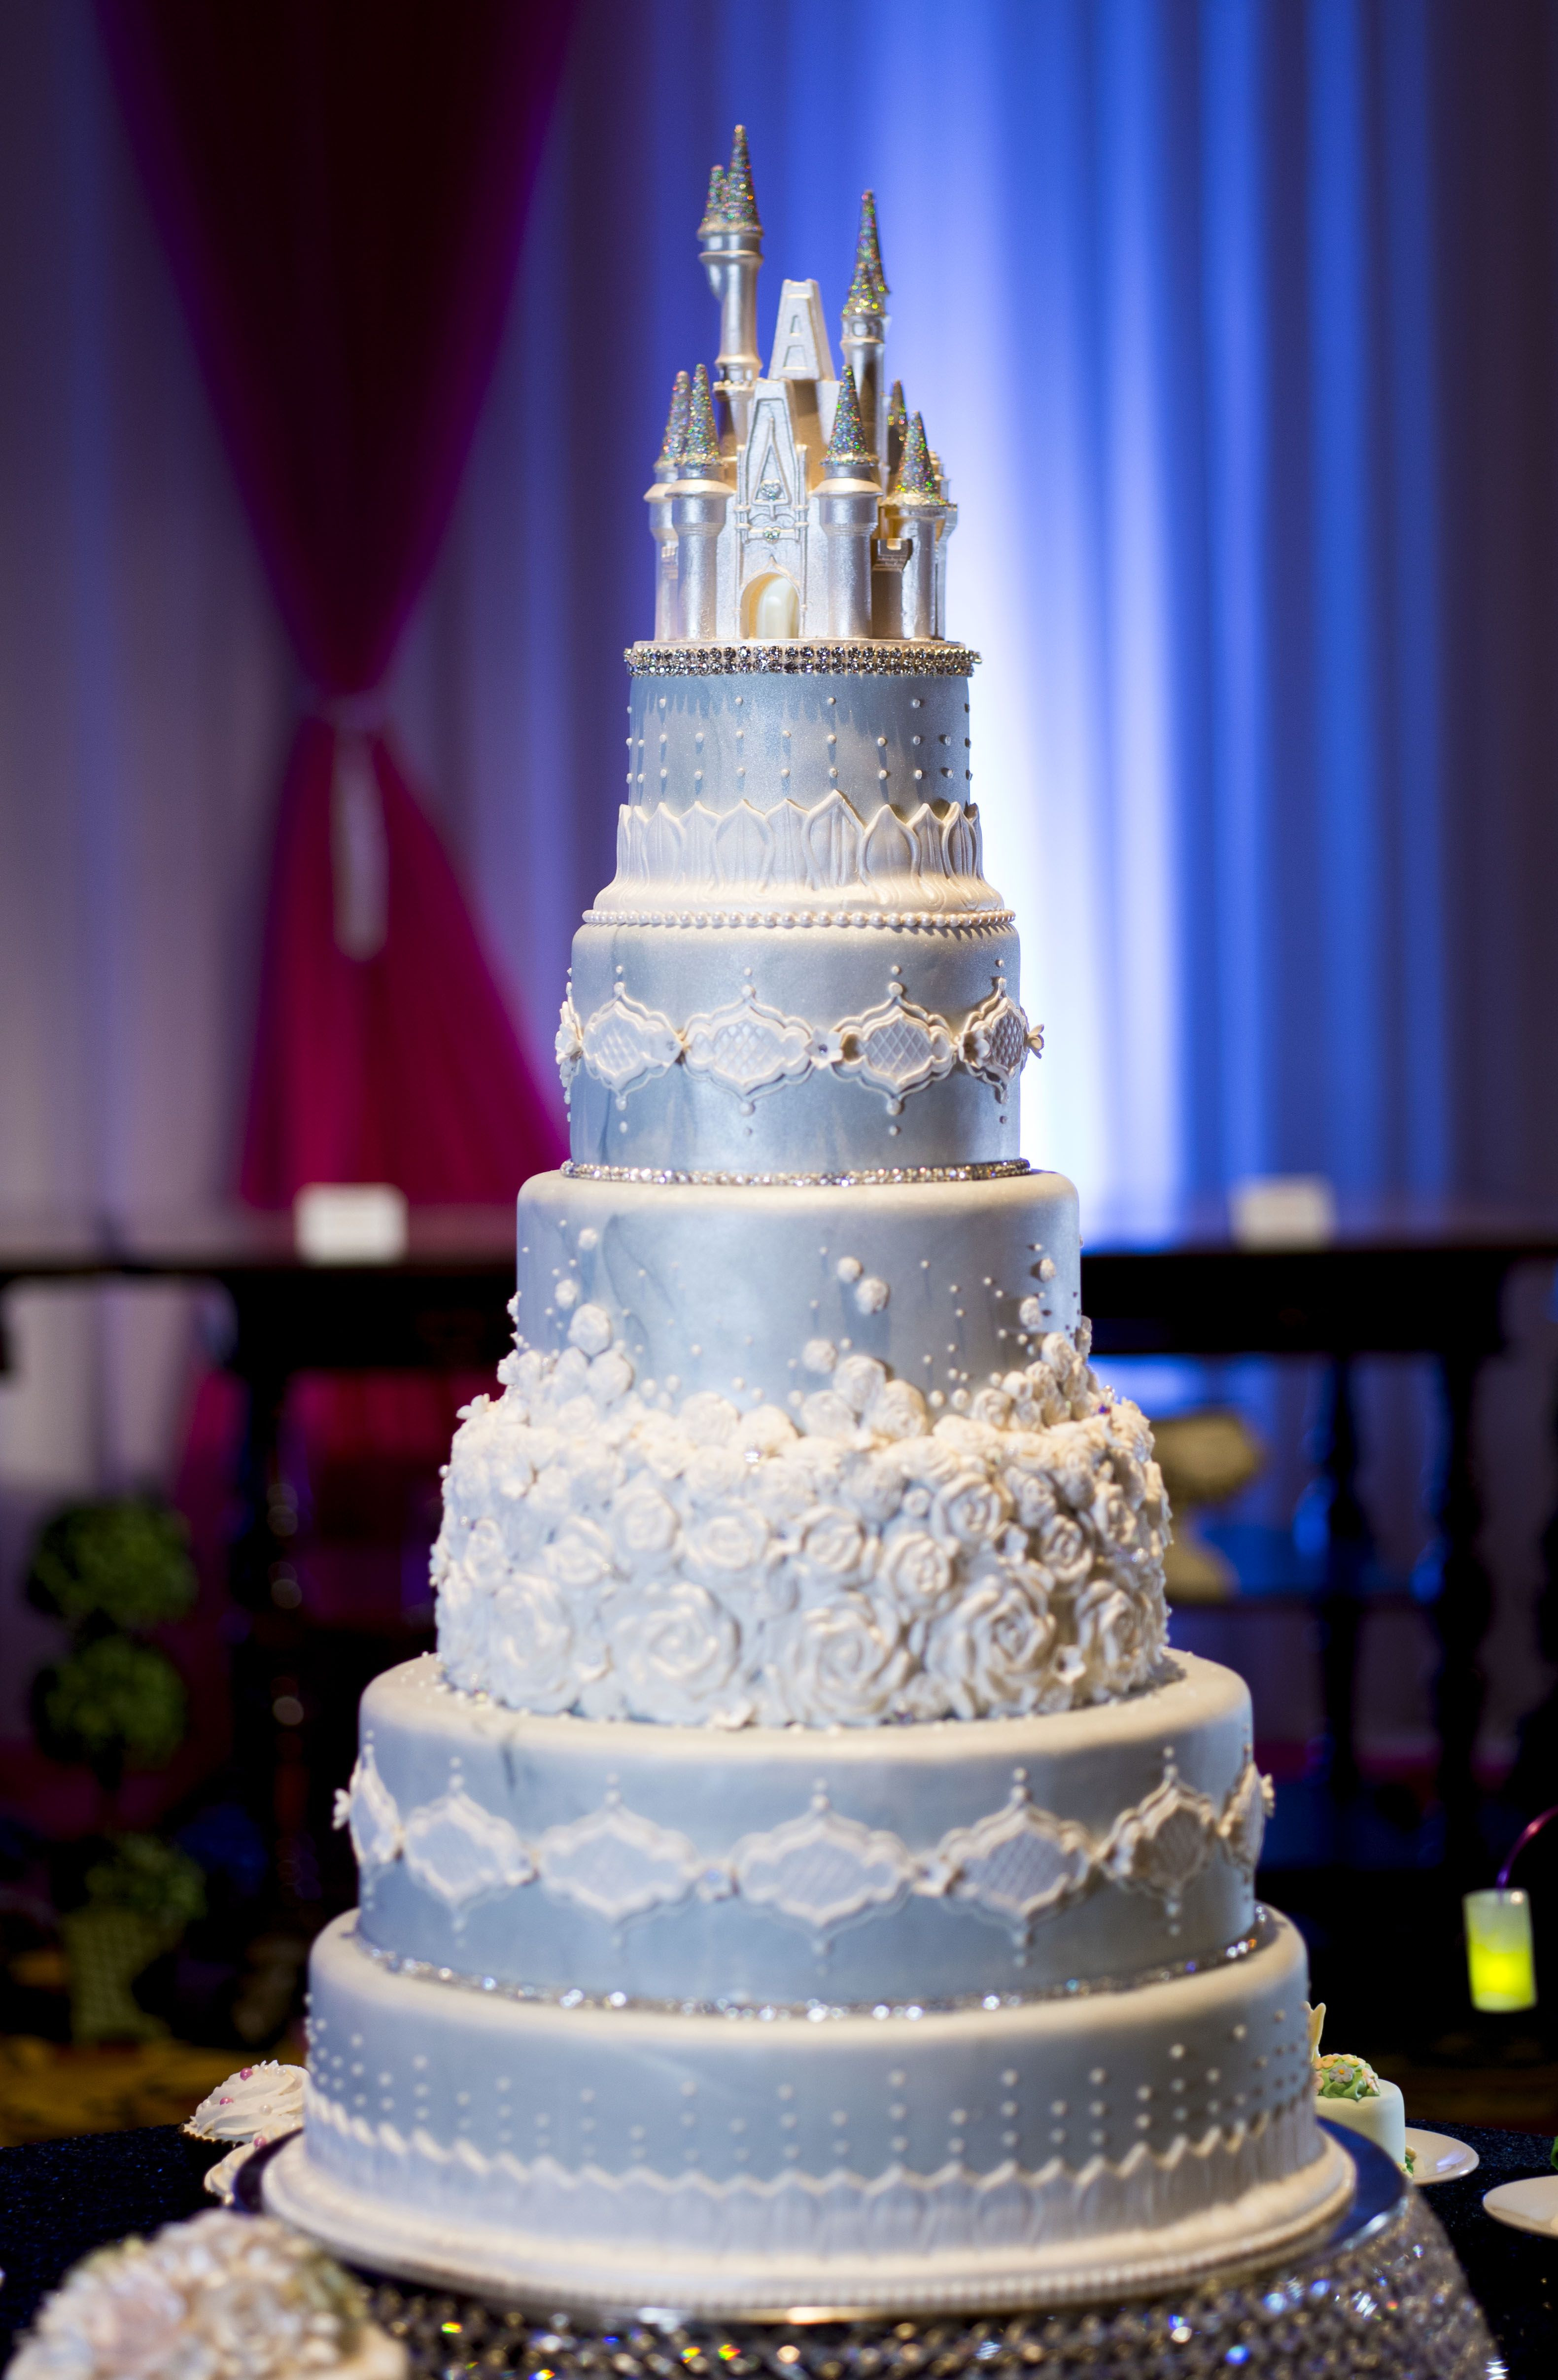 Castle Wedding Cakes
 This Cinderella Castle wedding cake will mand attention